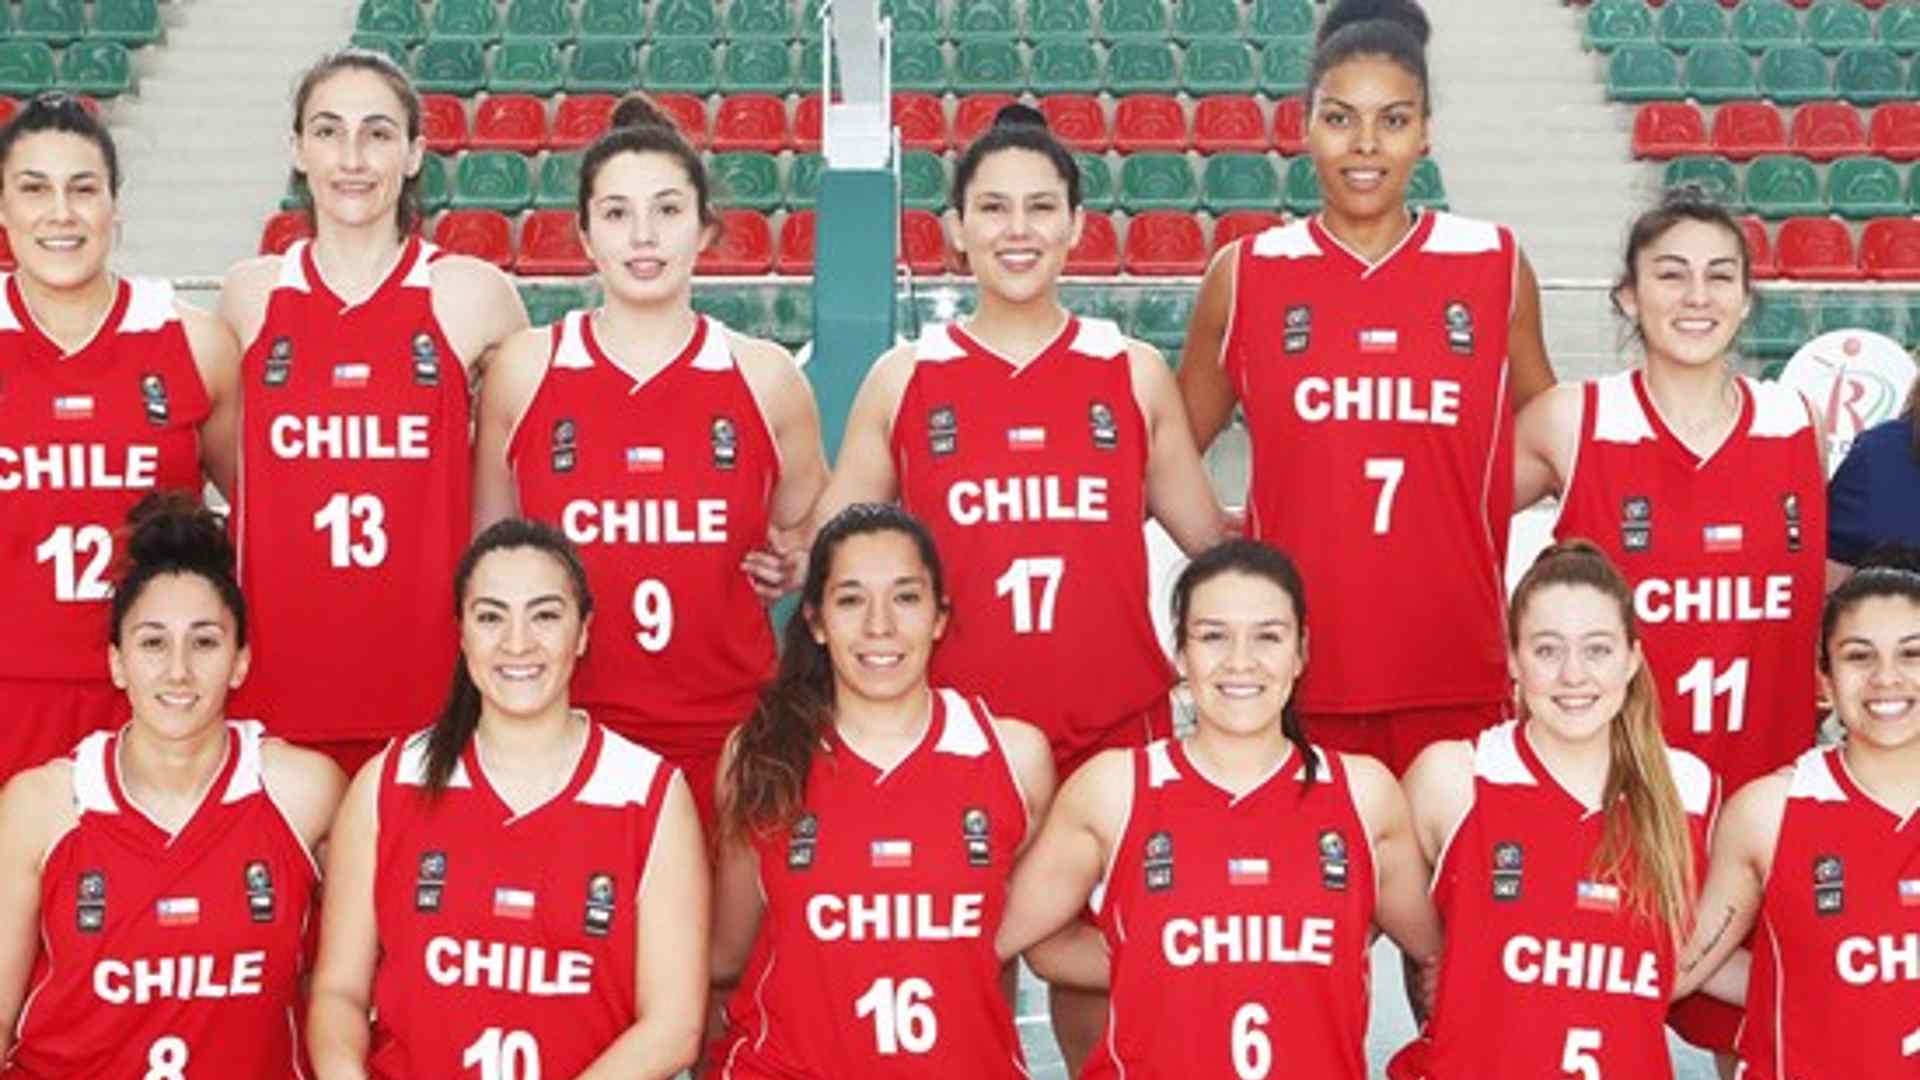 Brazil vs Chile: FIBA South American Championship Women's Live Stream,  Schedule, Fixture, and Probable Lineups, August 3, 2022